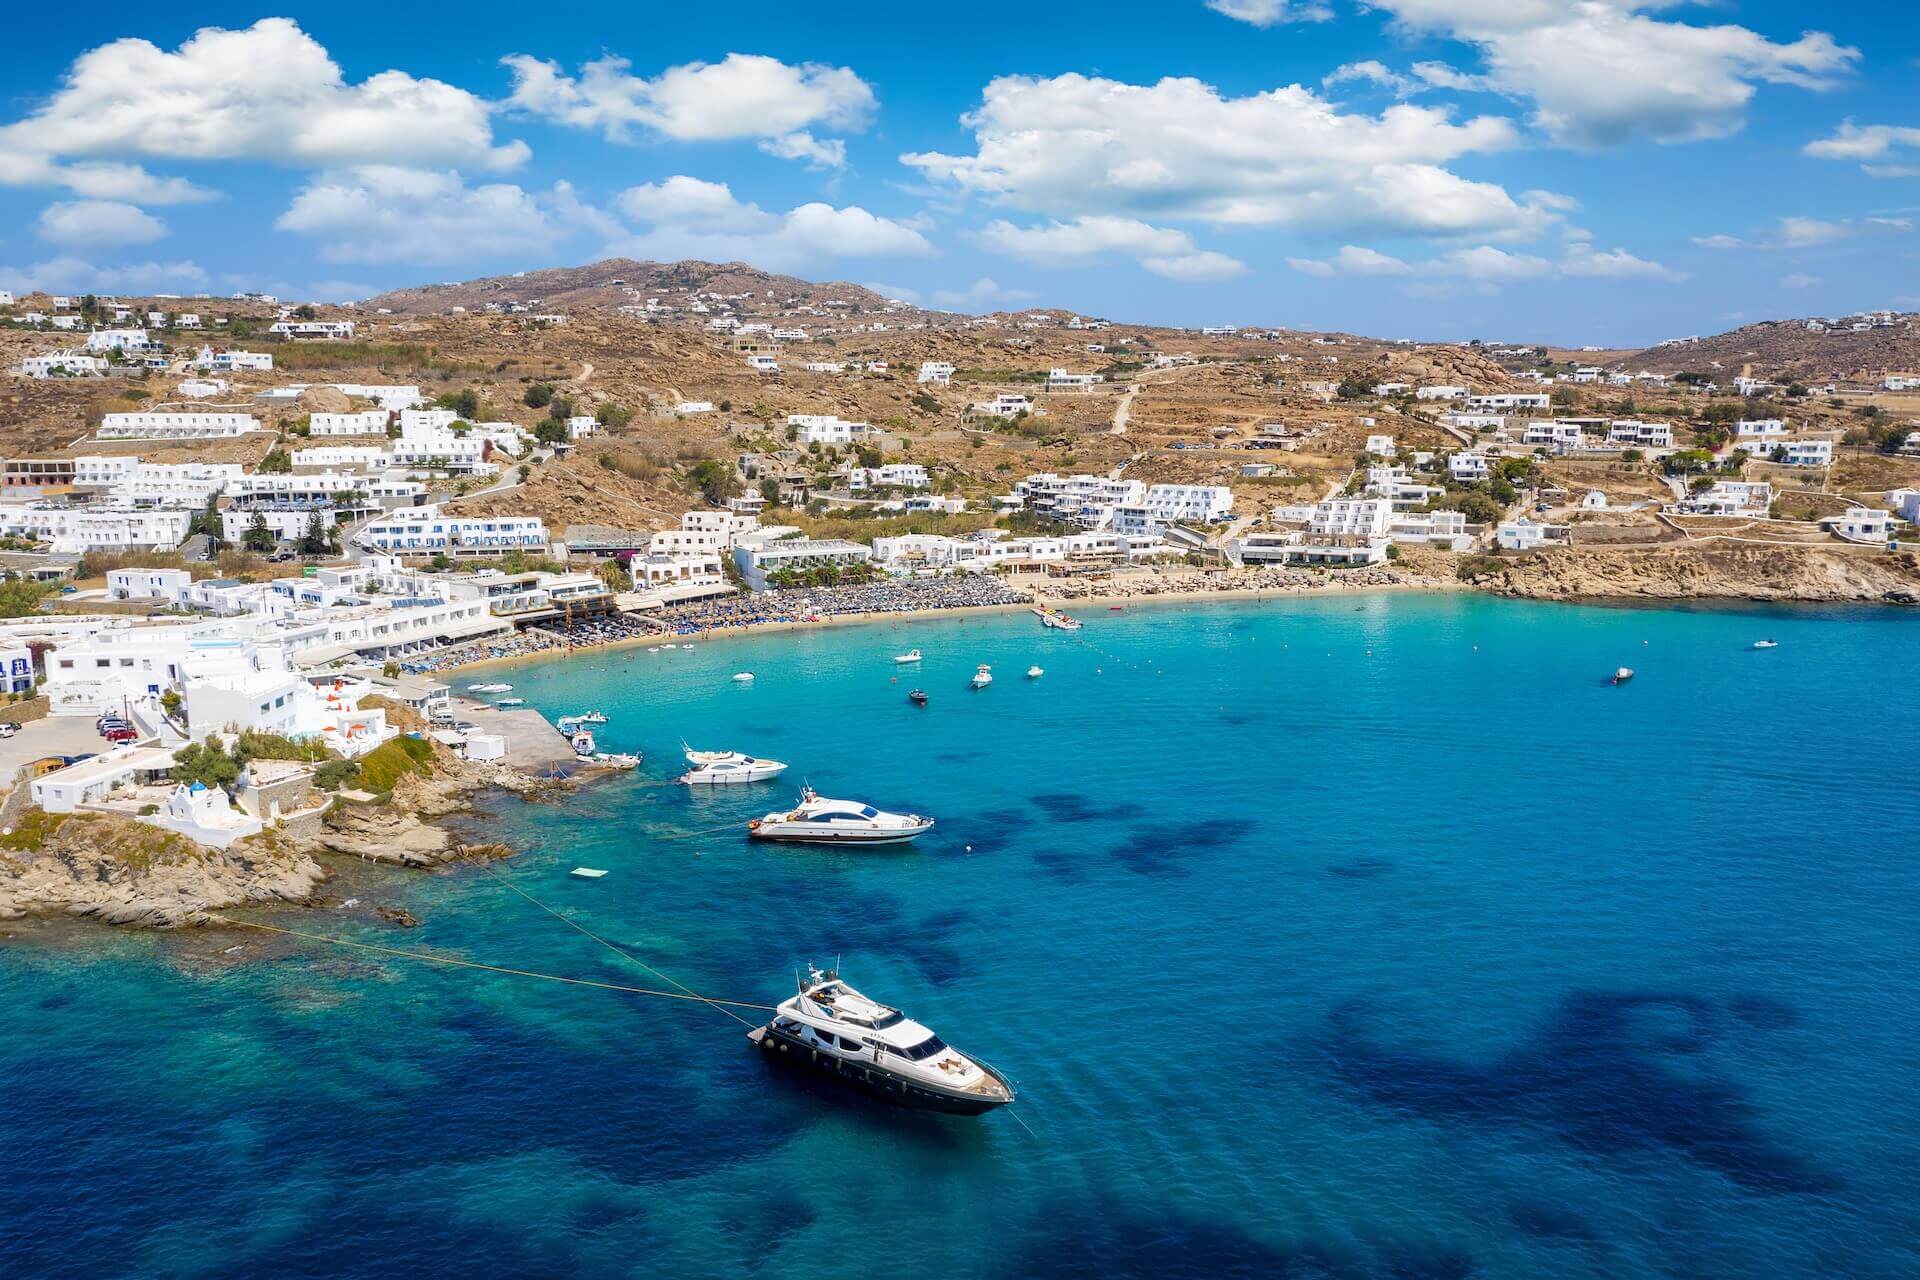 View of Mykonos town